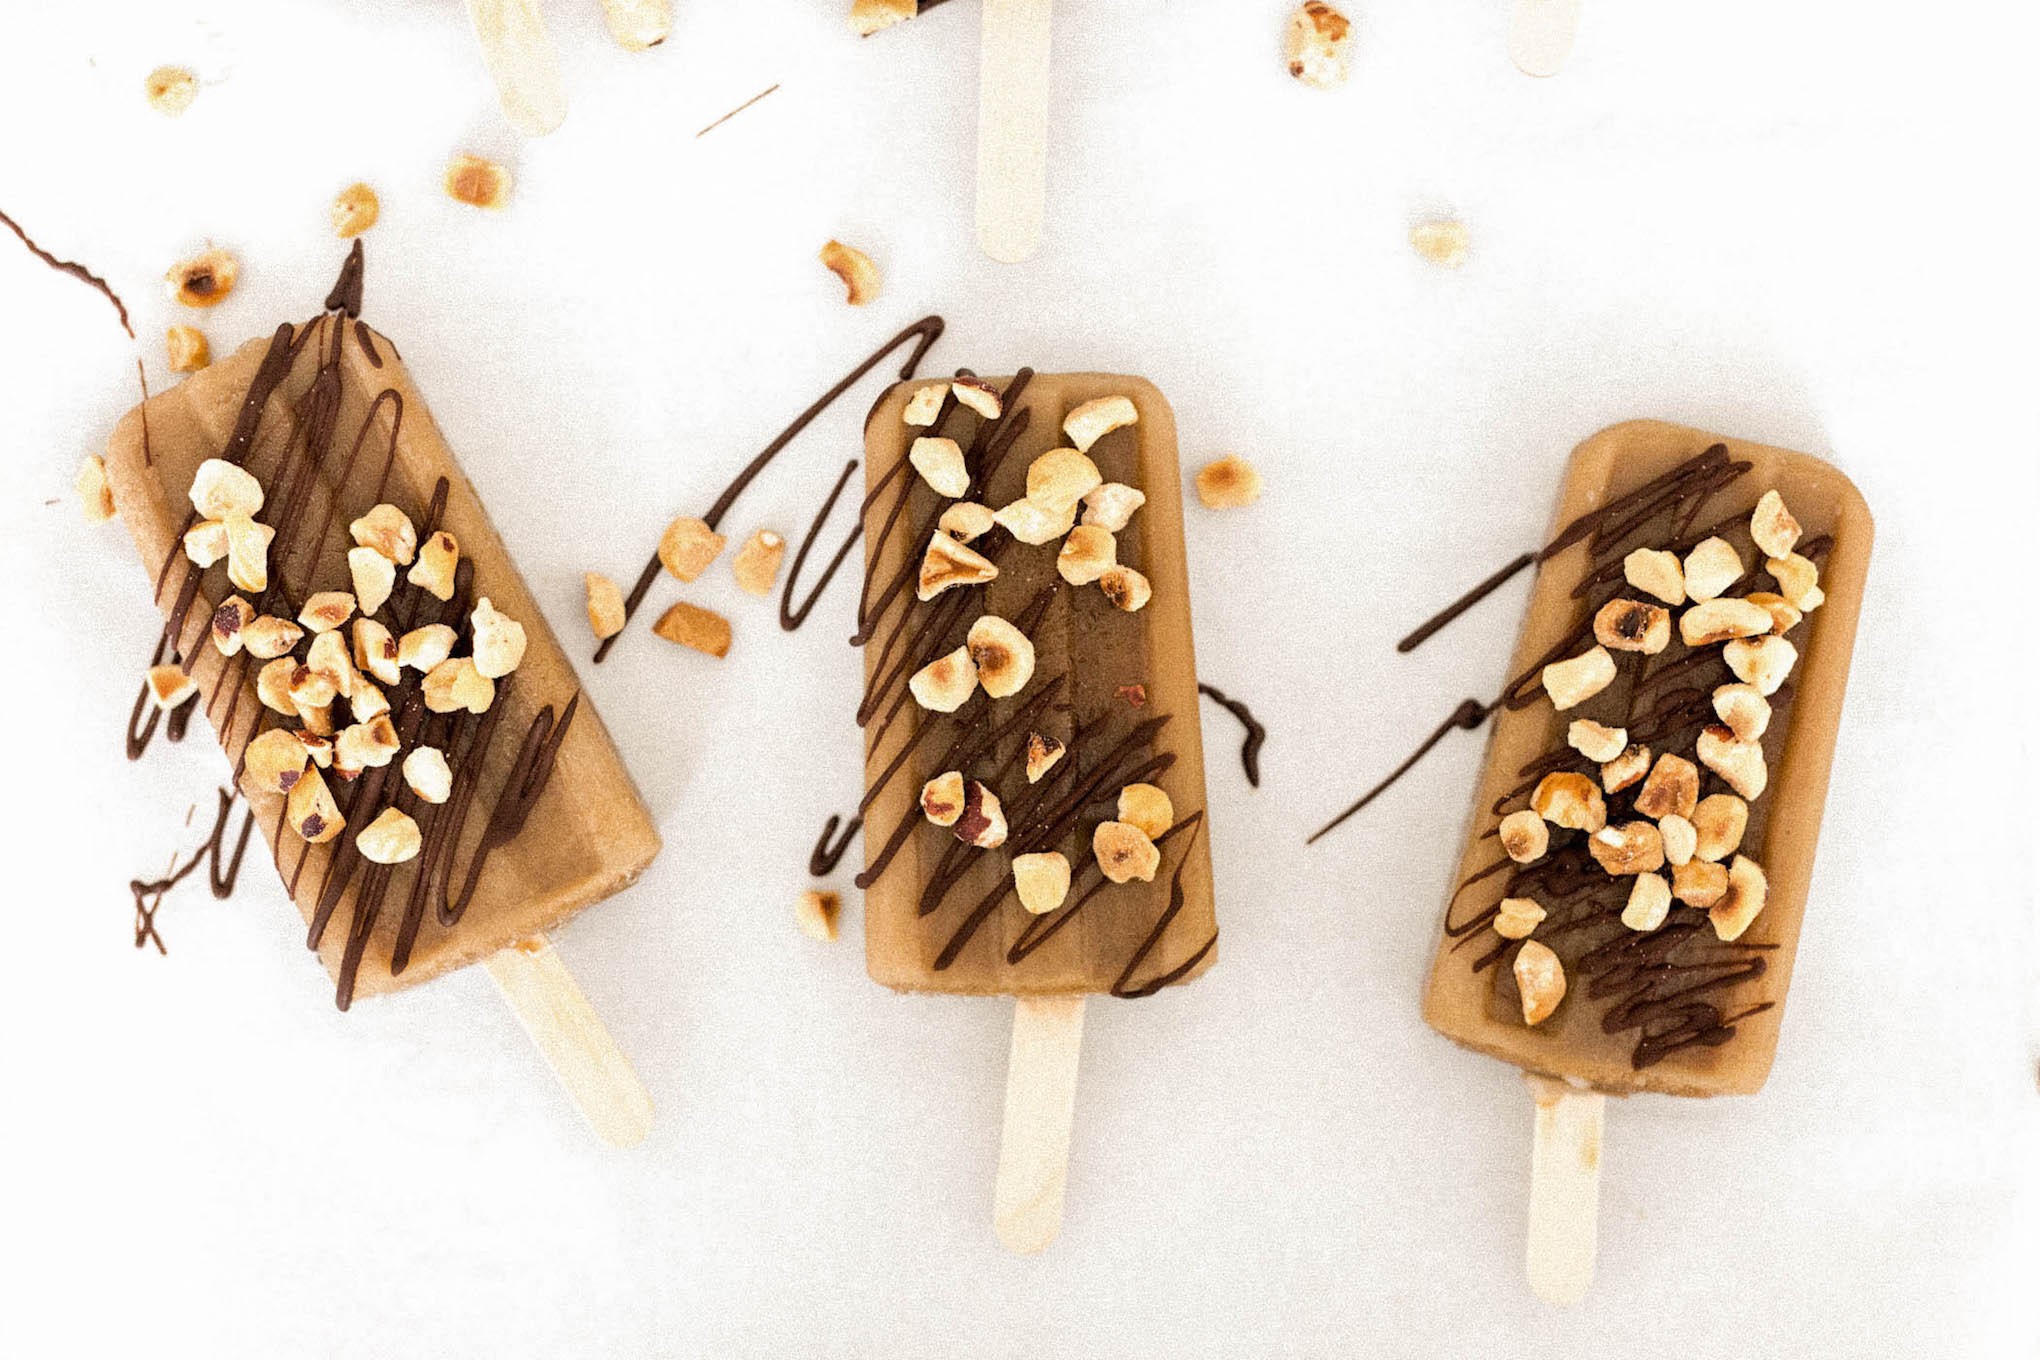 Coffee Popsicles with Chocolate Drizzle | The Coastal Confidence by Aubrey Yandow